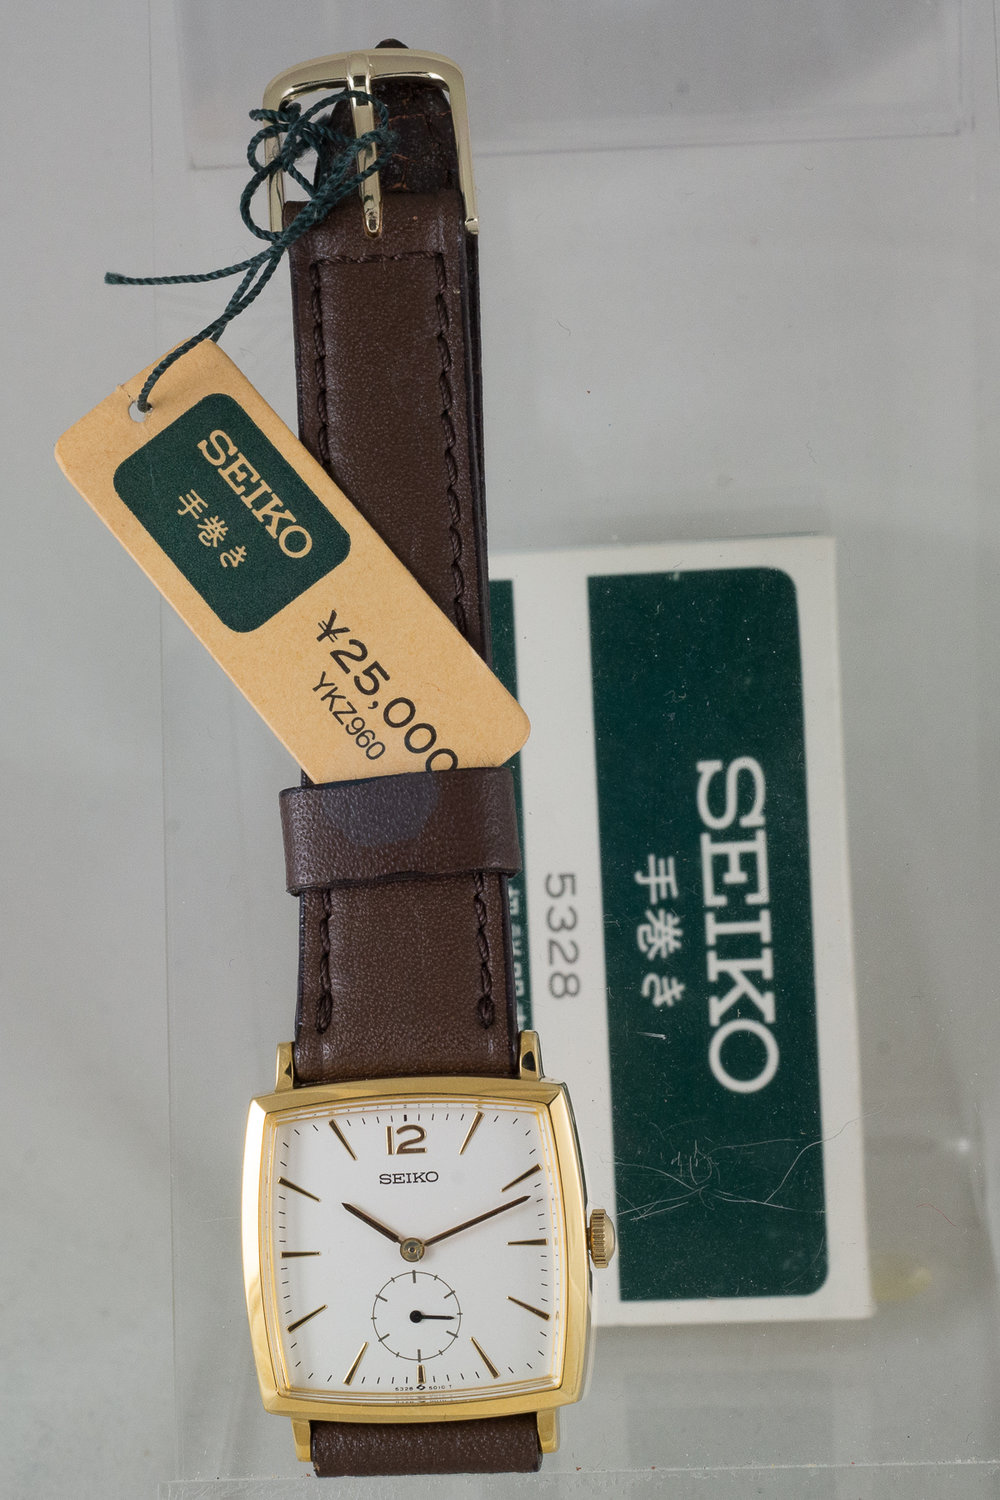 Update: The Seiko with a Swiss Movement — Plus9Time